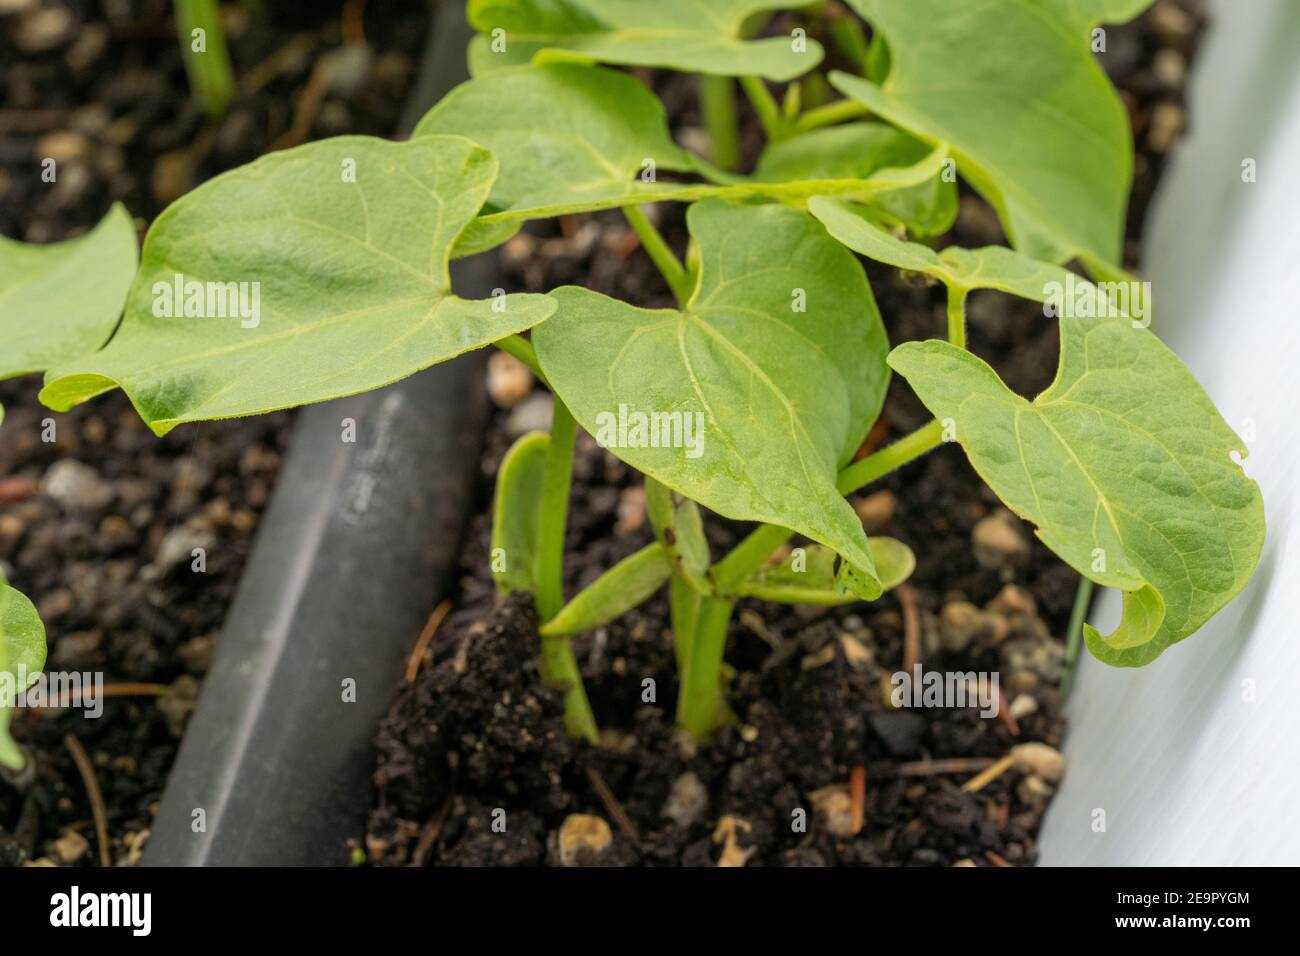 Issaquah, Washington, USA.  Monte Cristo Pole Bean seedlings showing cotyledons, the first leaves produced by plants. Cotyledons are not considered tr Stock Photo